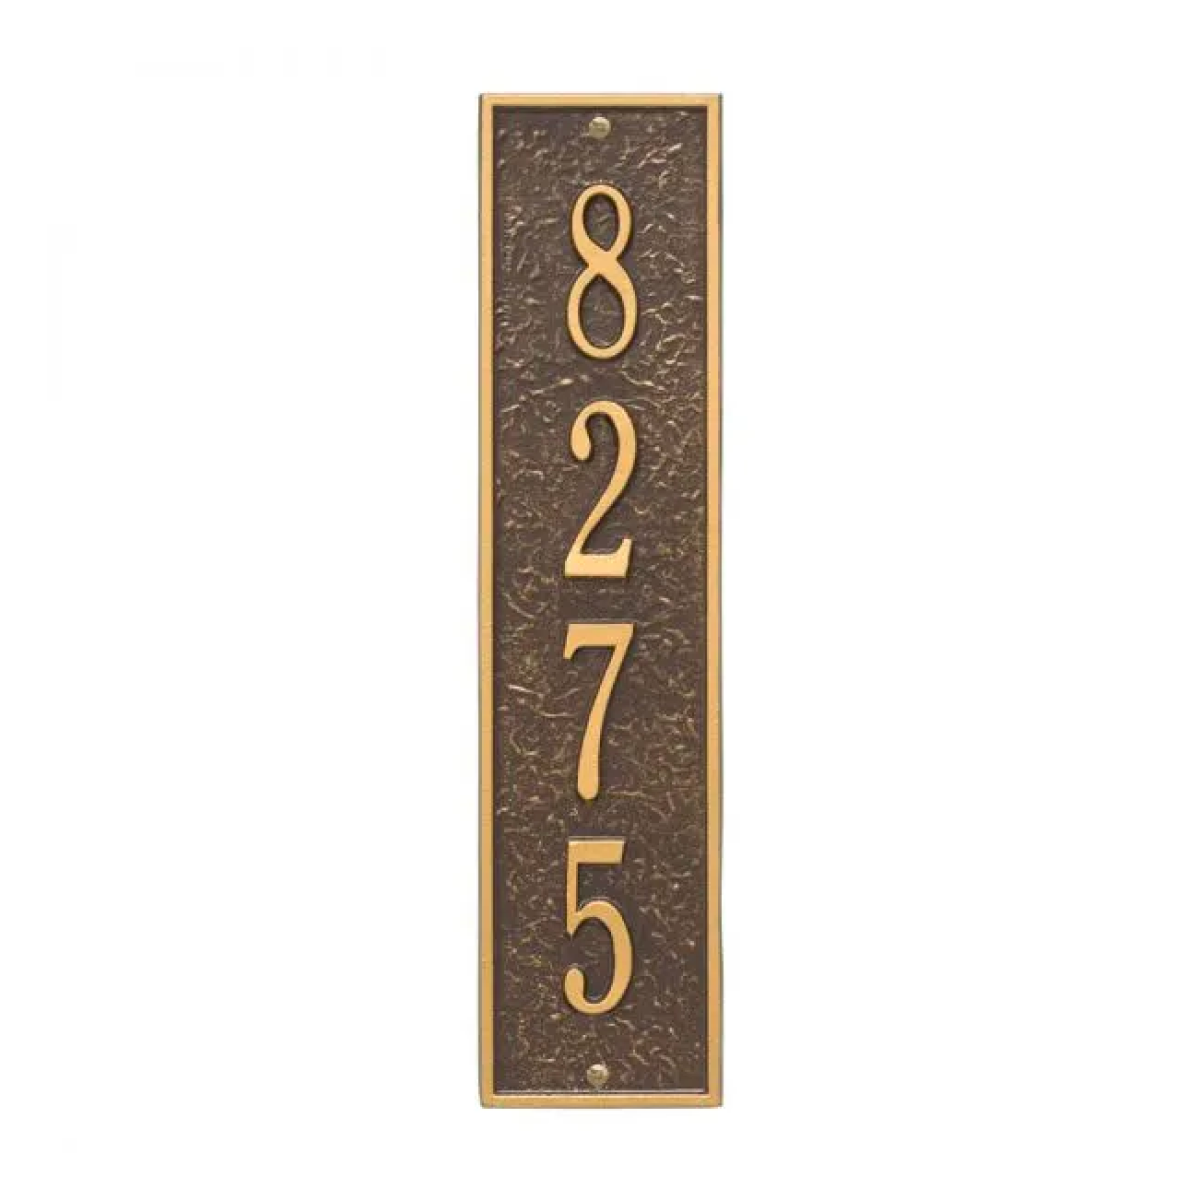 Whitehall Delaware Vertical Address Plaque Product Image